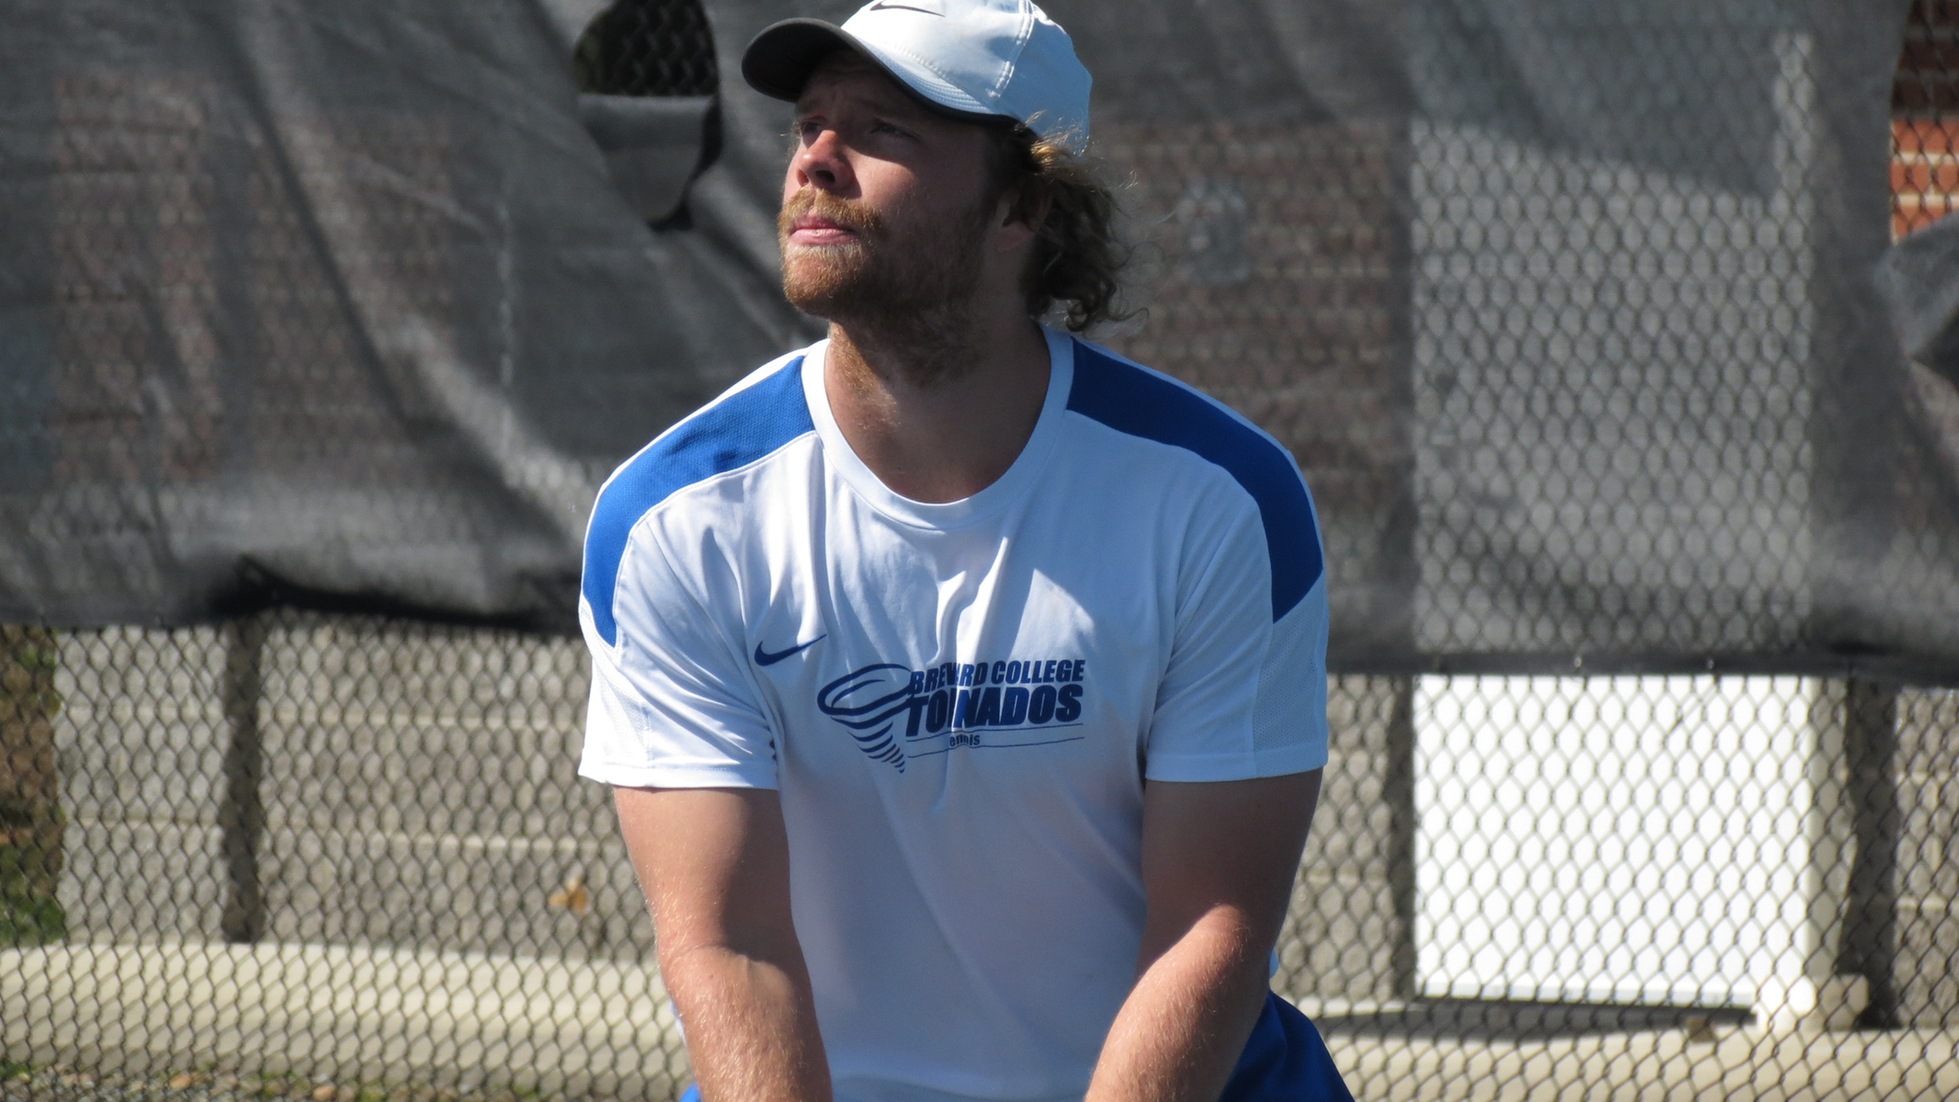 Tom Mittring Collects First USA South Men’s Tennis Player of the Week Award of 2019